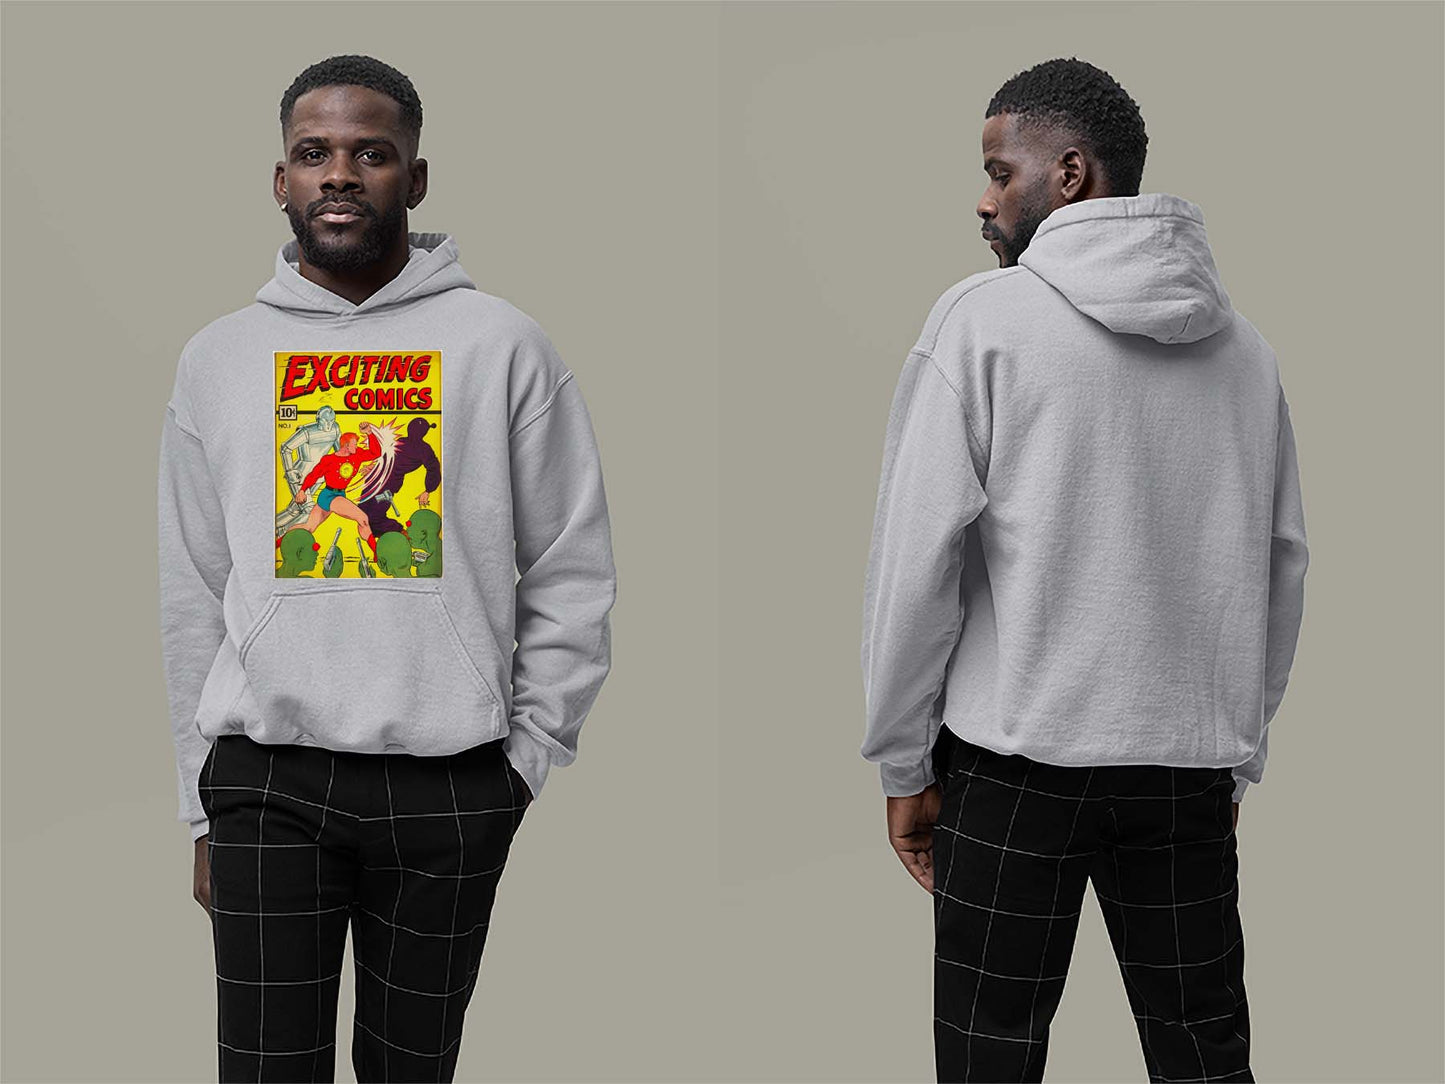 Exciting Comics No.1 Hoodie Small Sport Grey